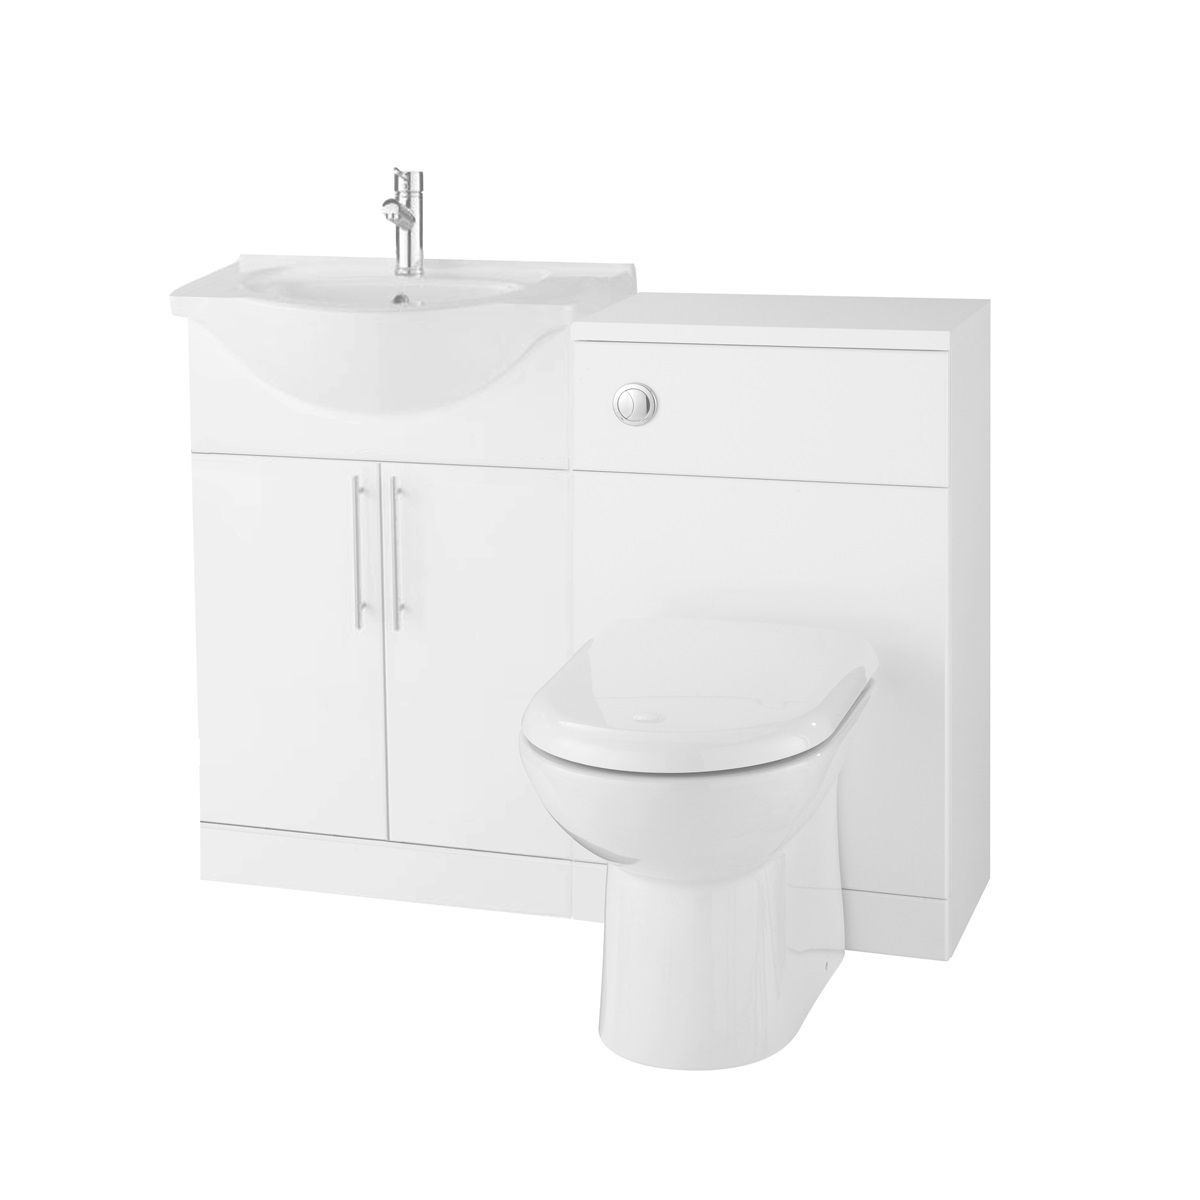 Glacier Vanity Unit Basin 550mm With Back To Wall Toilet Unit